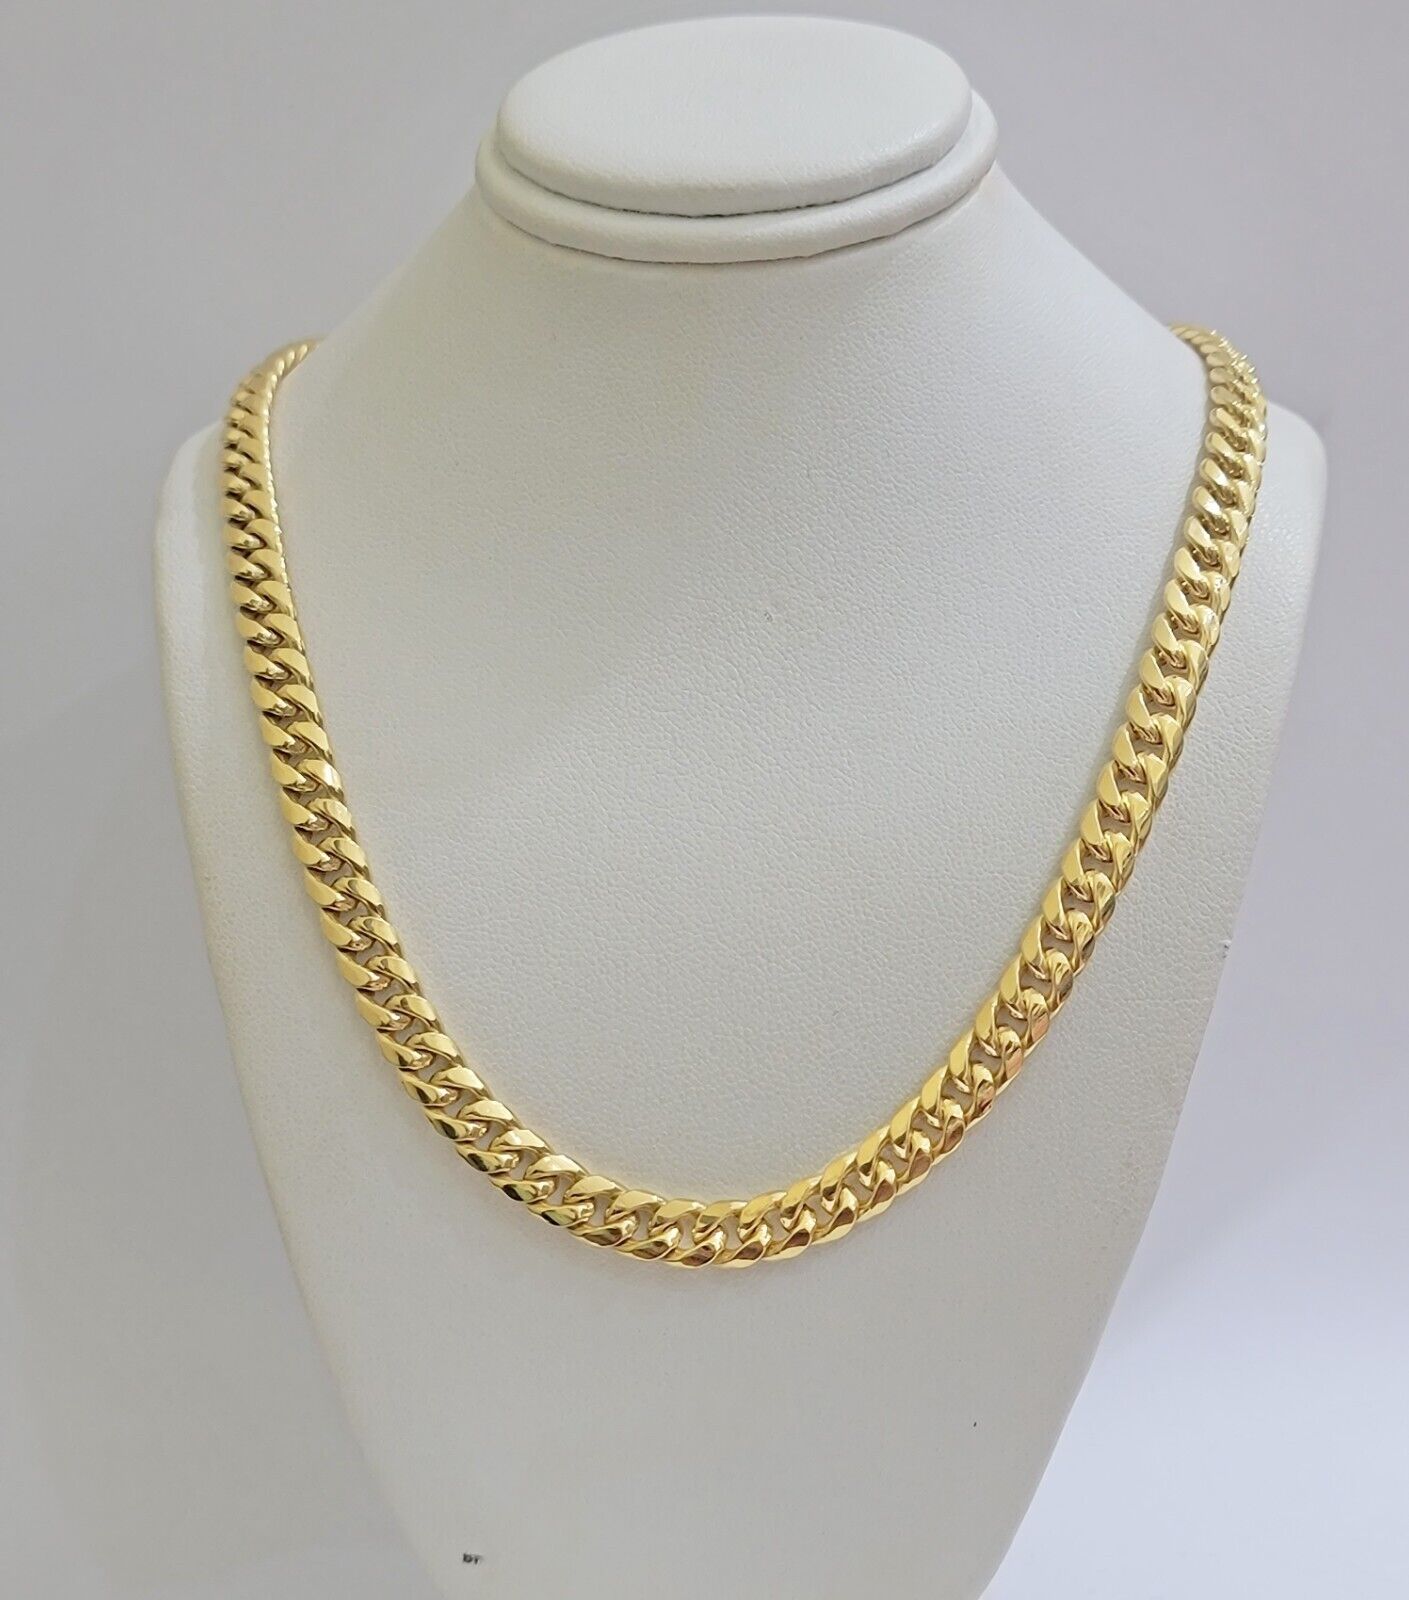 10k Gold Necklace 7mm 20 Inch Miami Cuban Link Chain REAL 10kt Yellow Gold Men's